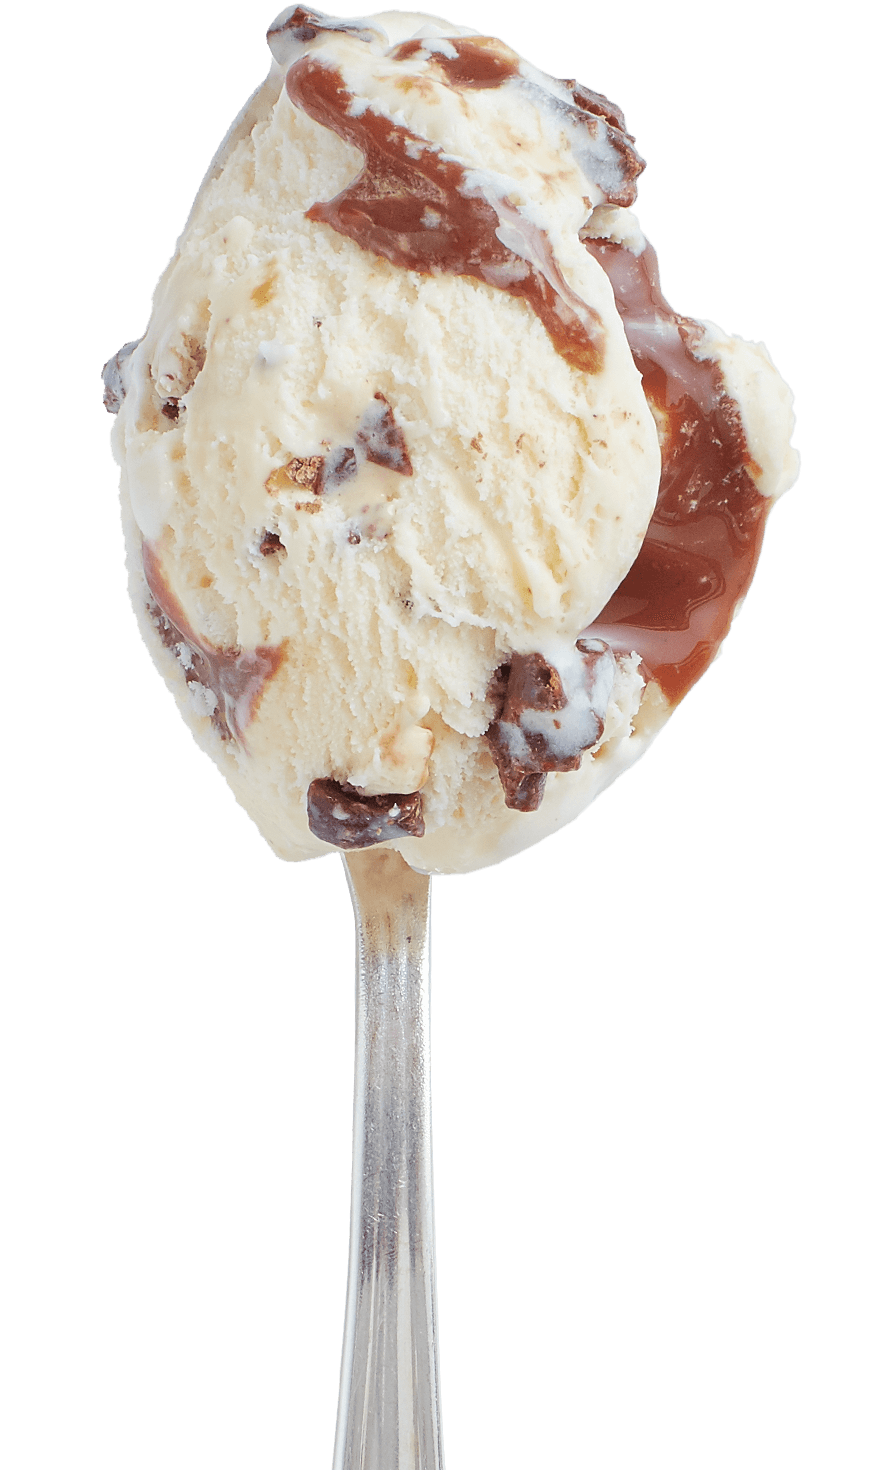 A spoonful of ice cream